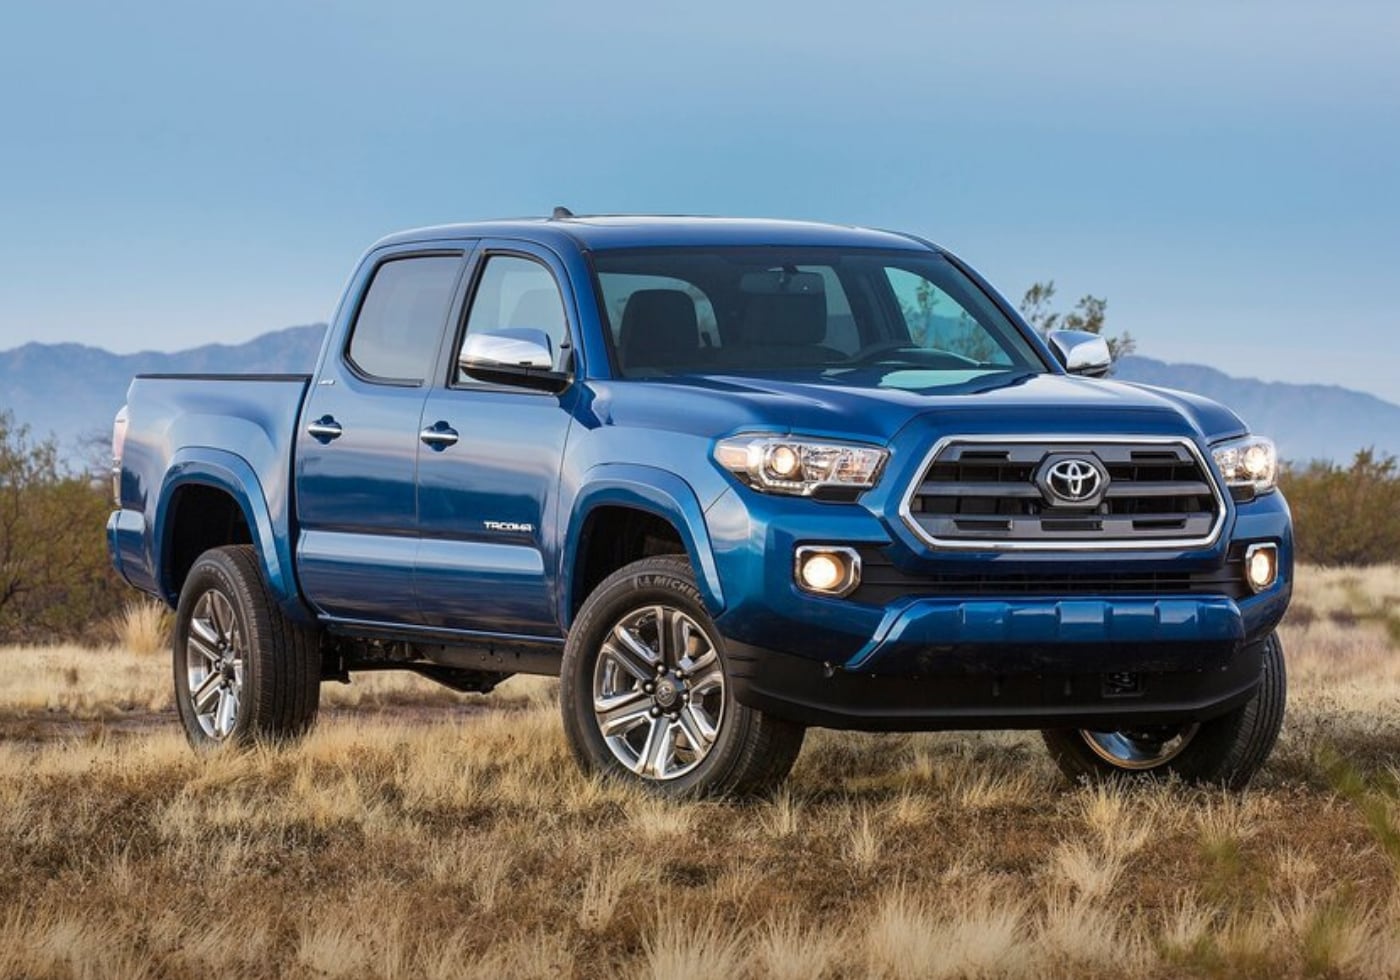 Blue 2016 Toyota Tacoma parked on a fading grassy field with a mountain range in the back drop